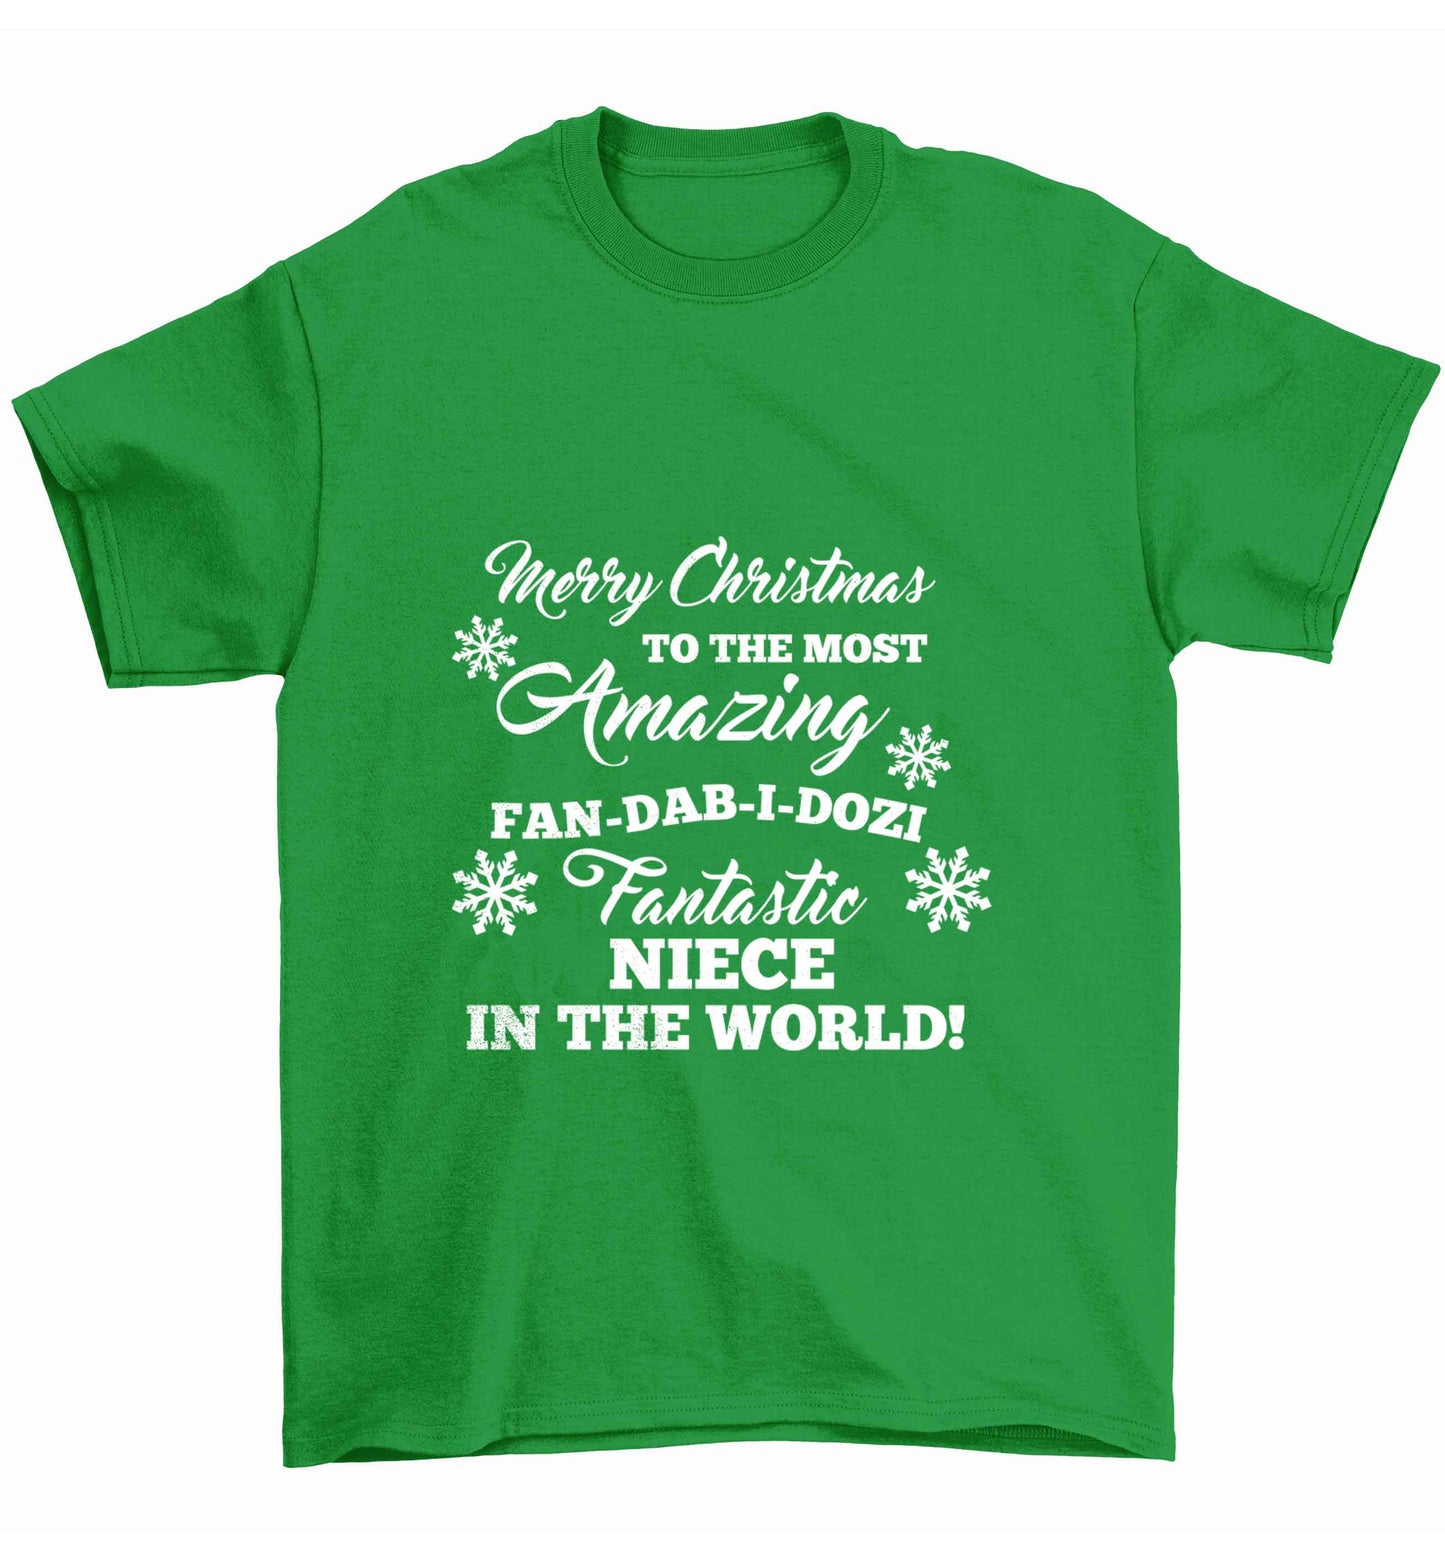 Merry Christmas to the most amazing fan-dab-i-dozi fantasic Niece in the world Children's green Tshirt 12-13 Years